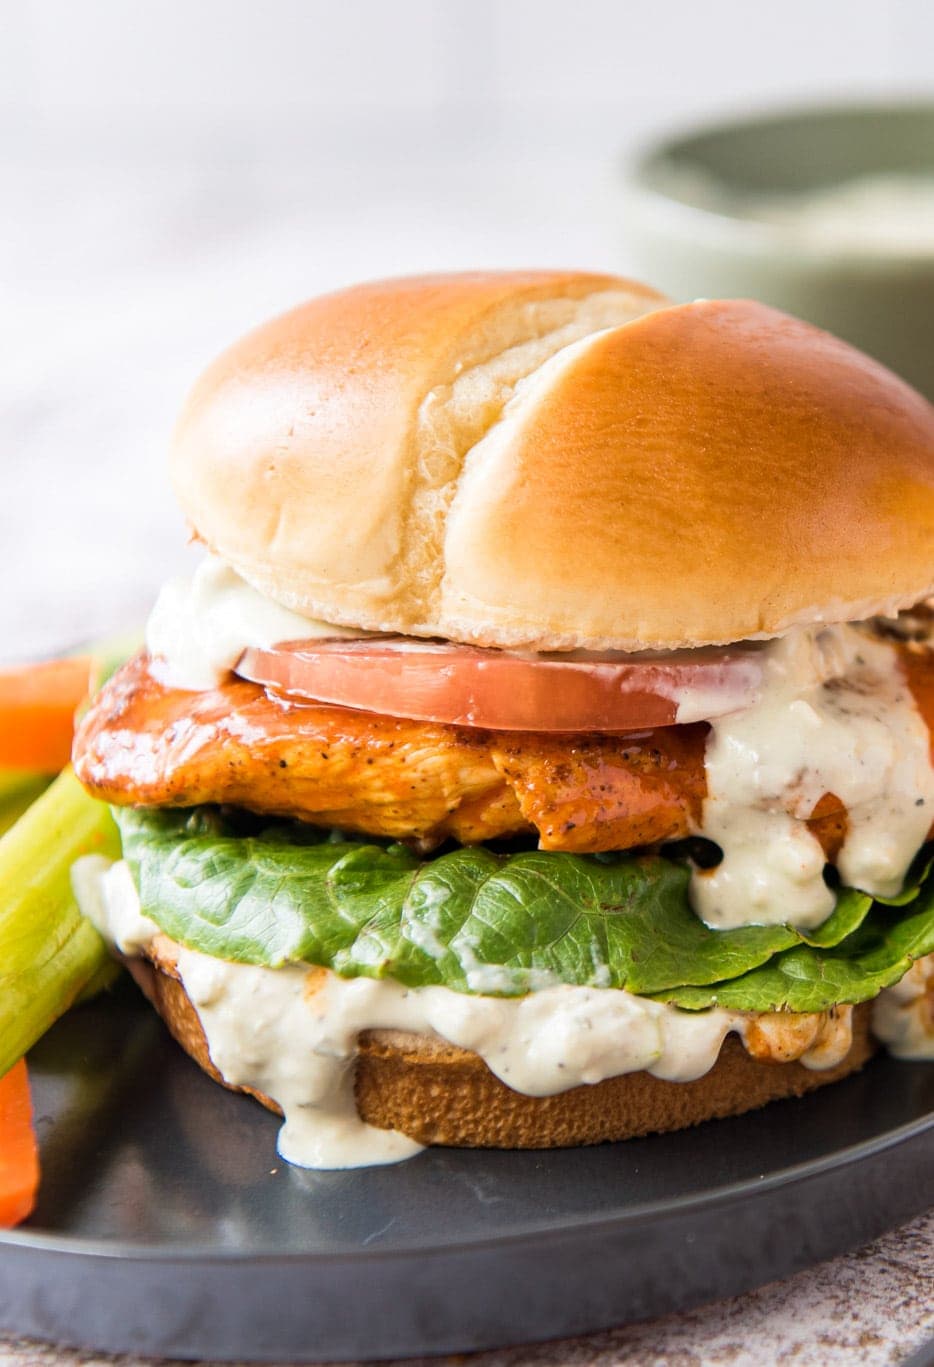 A chicken sandwich with a creamy white sauce, lettuce, a chicken breast with buffalo sauce, and a slice of tomato, on a bun.